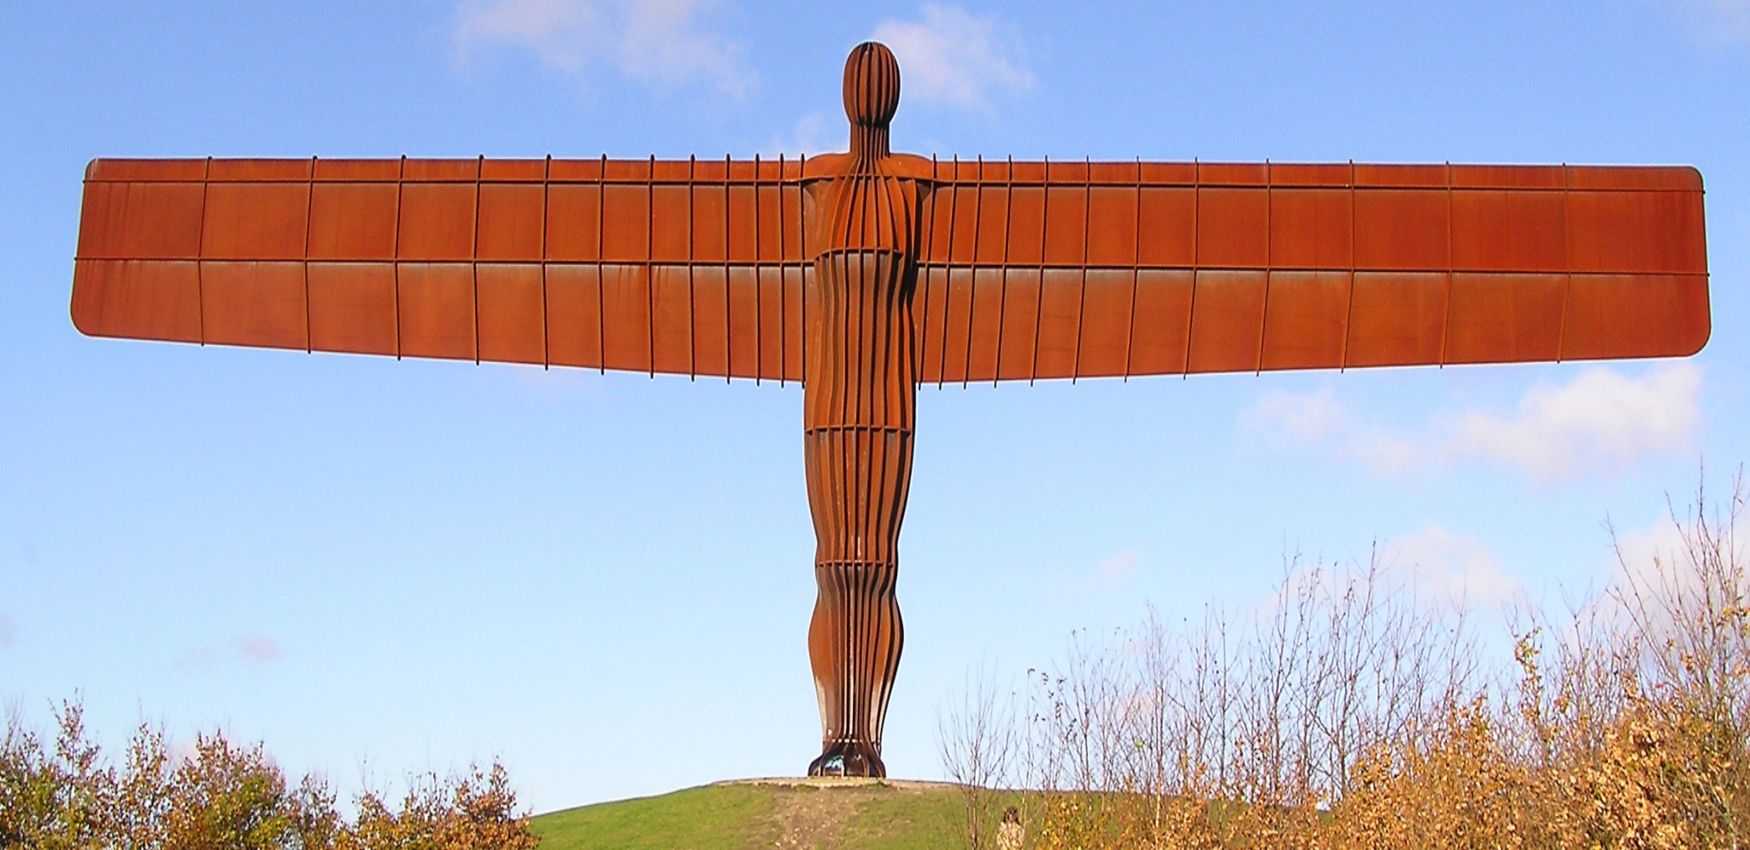 Angel of the North Statue in Newscastle